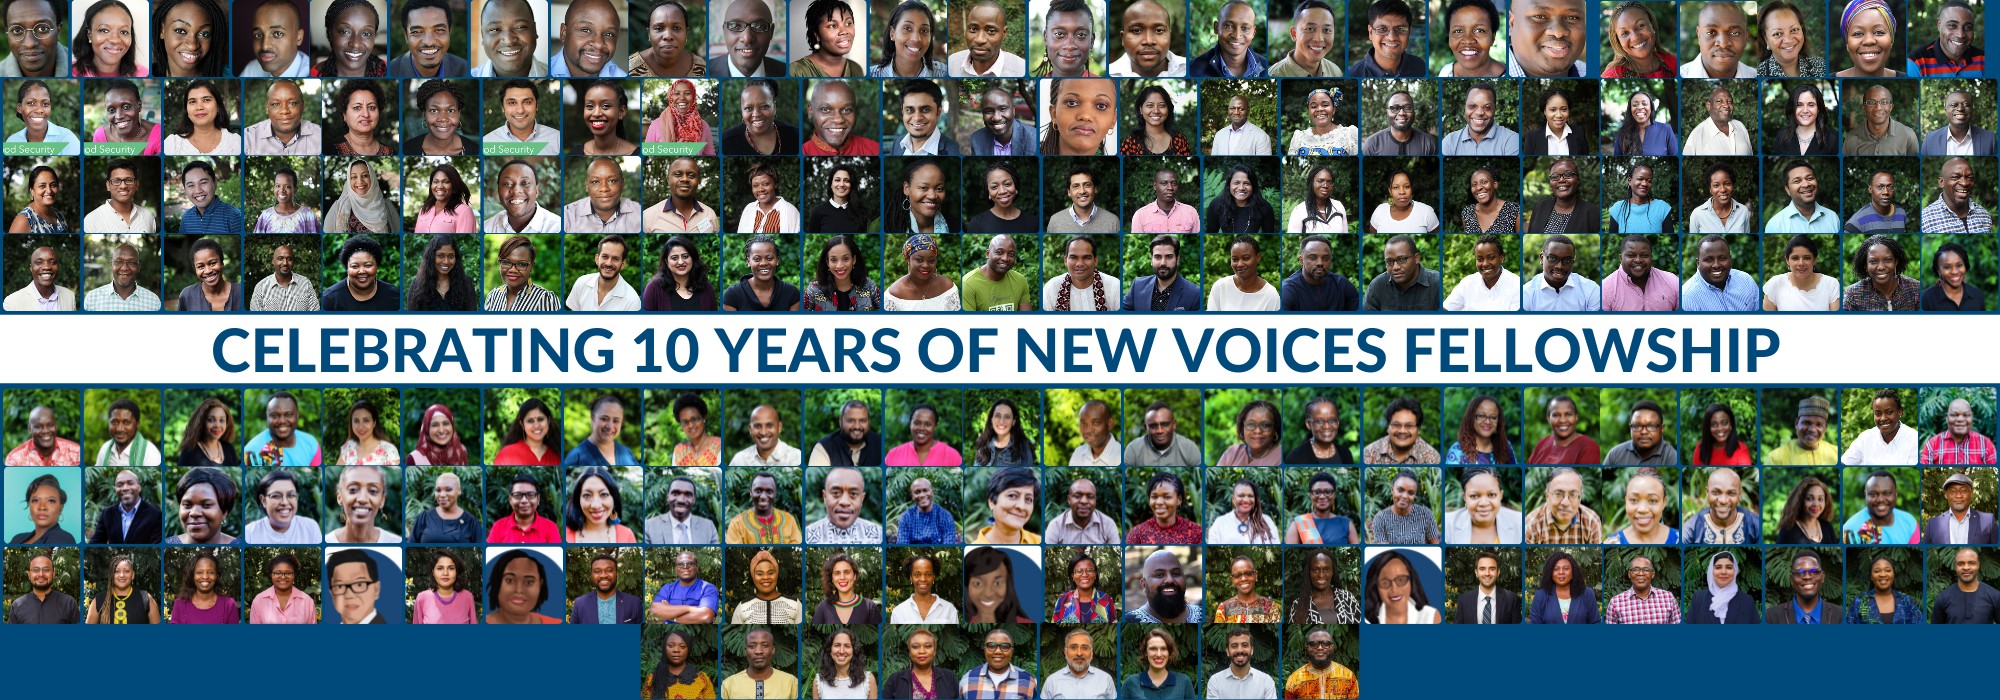 Celebrating 10 years of Aspen New Voices - All Fellows